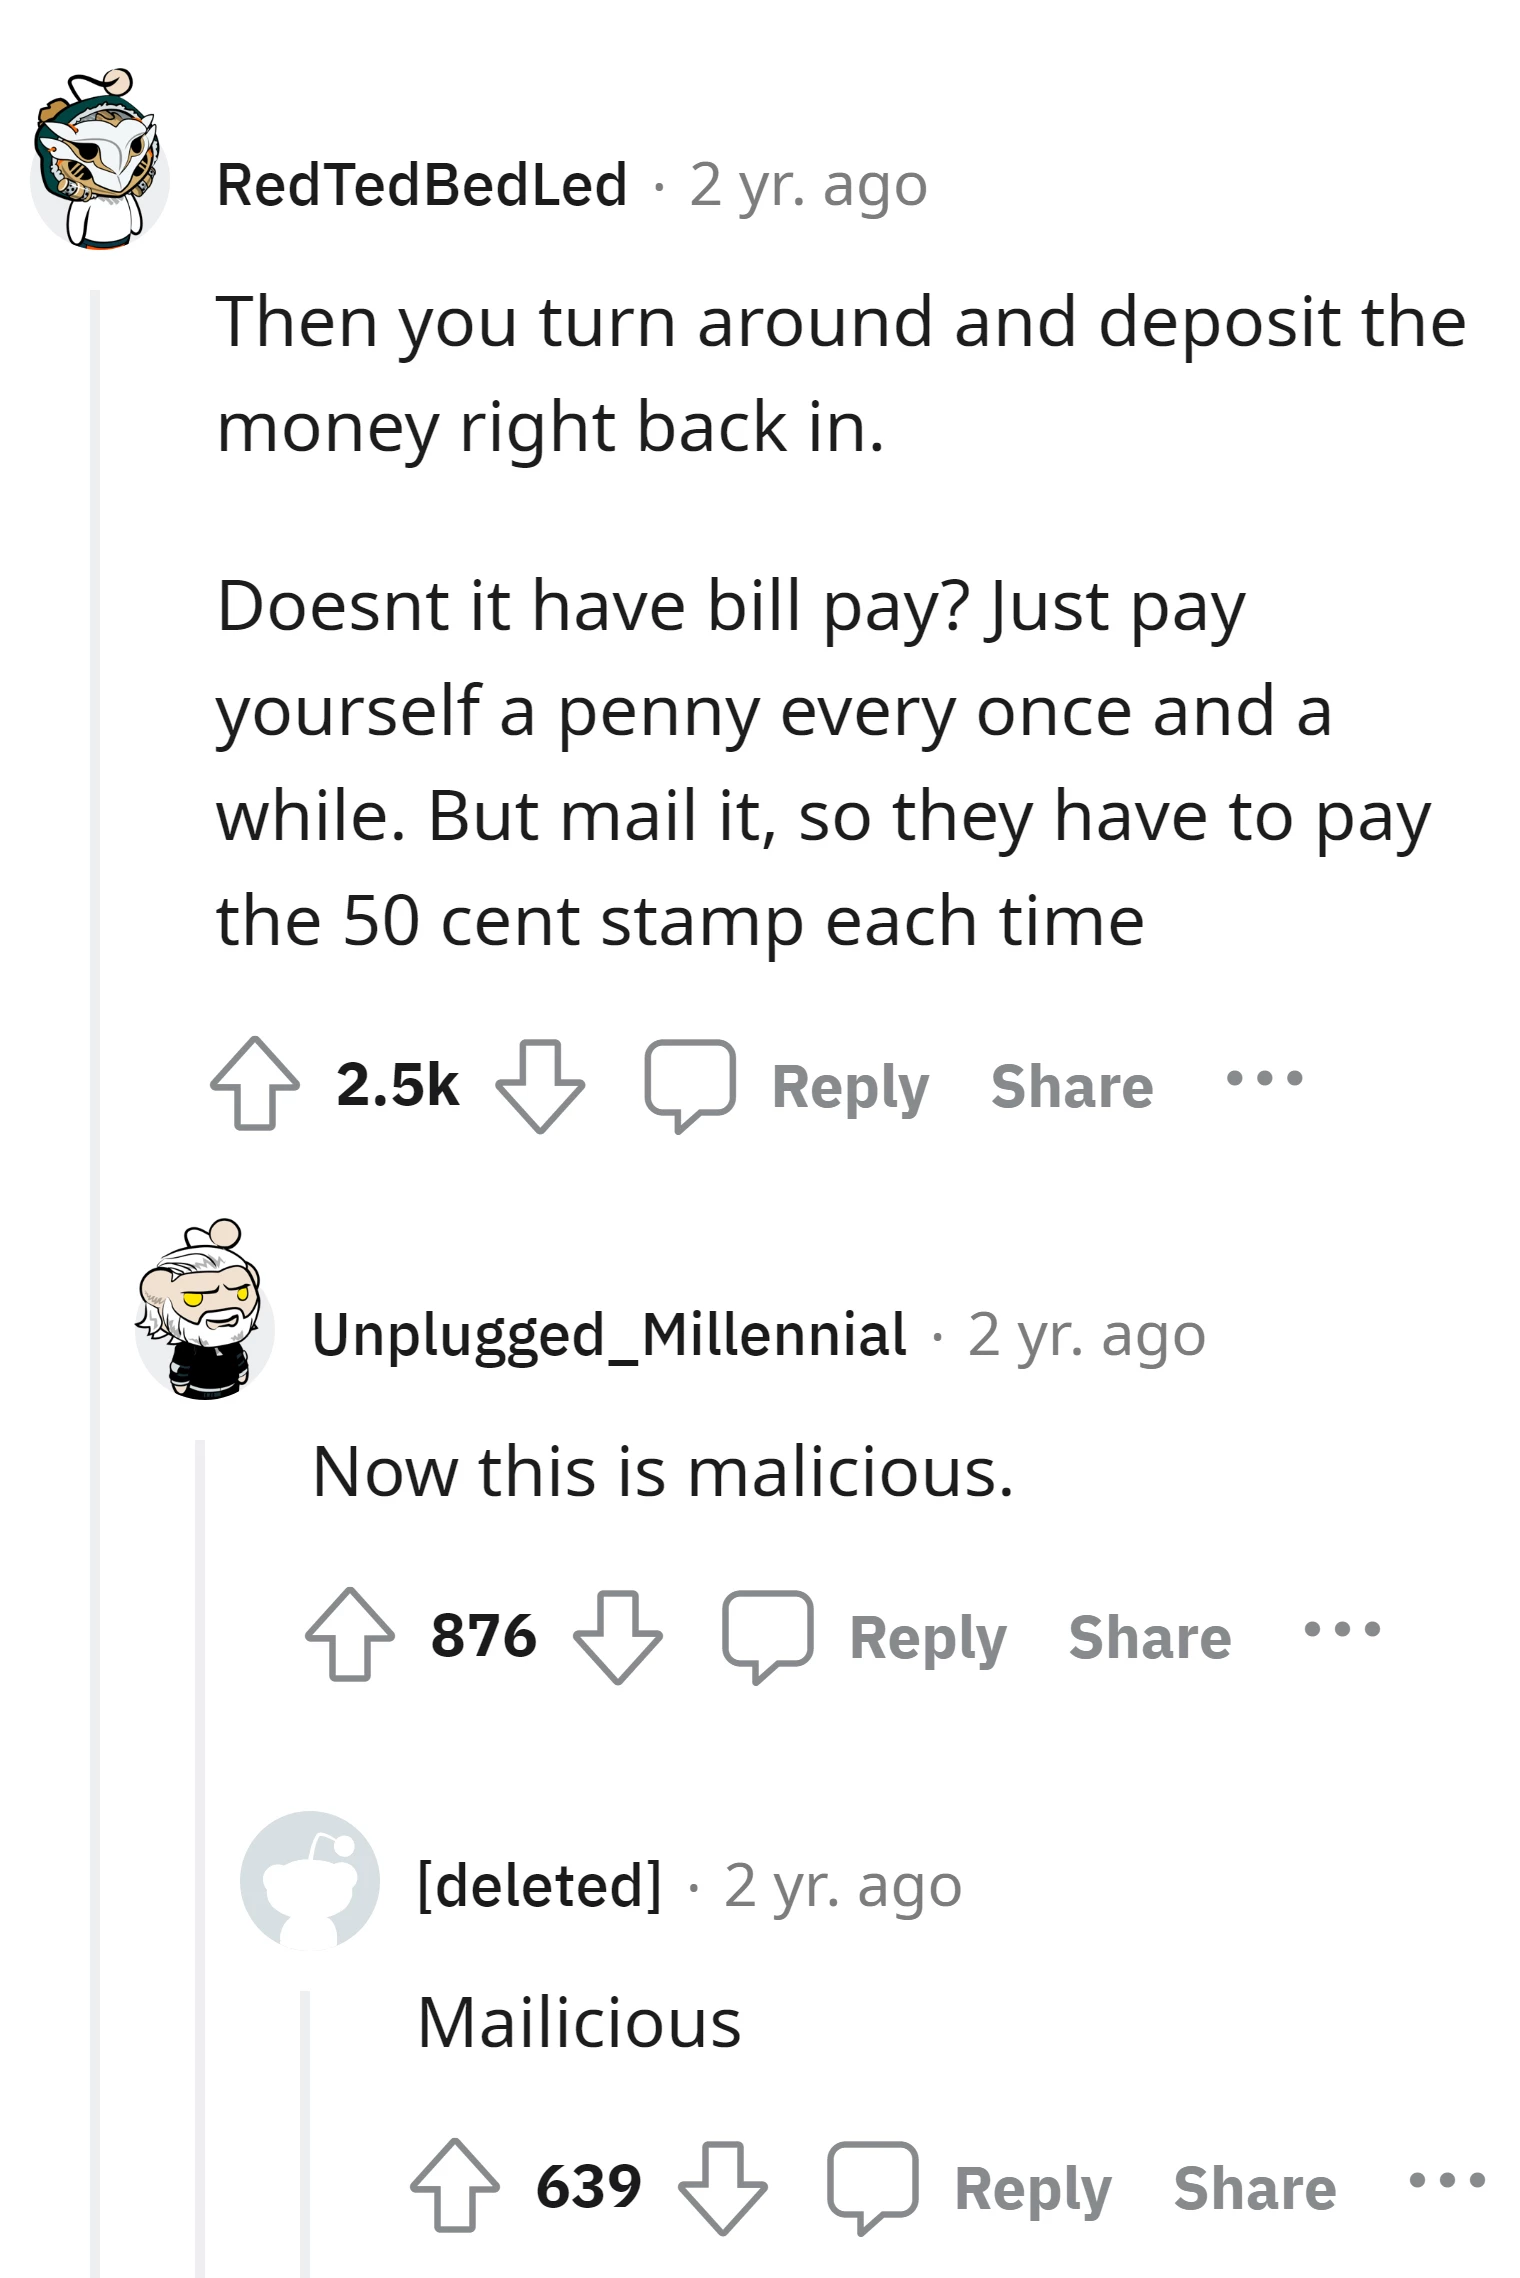 This commenter suggests a playful way to counter inactivity fees on a bank account